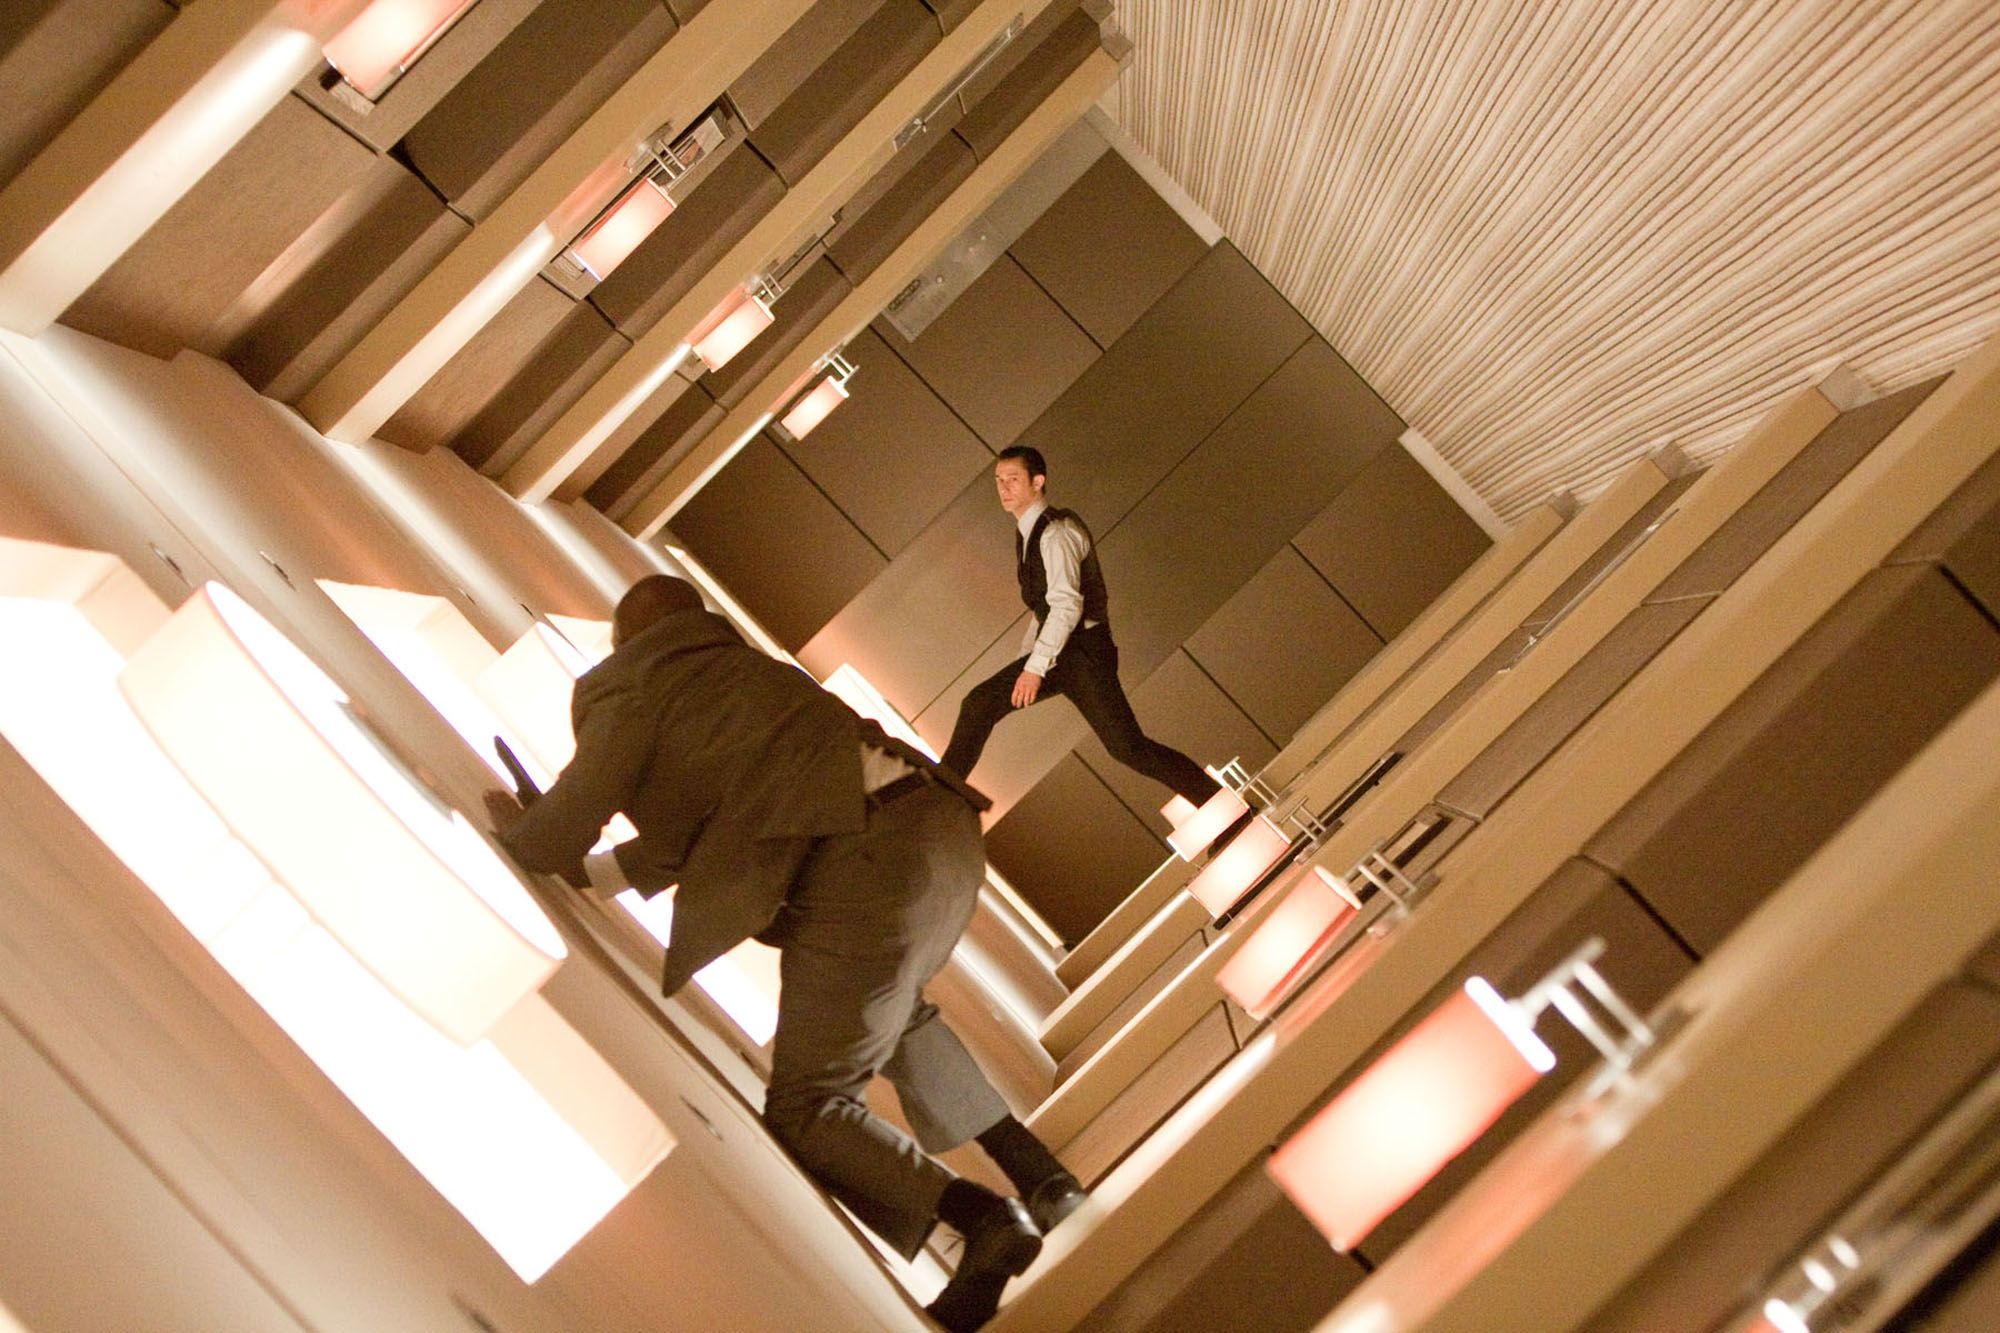 A scene from Inception